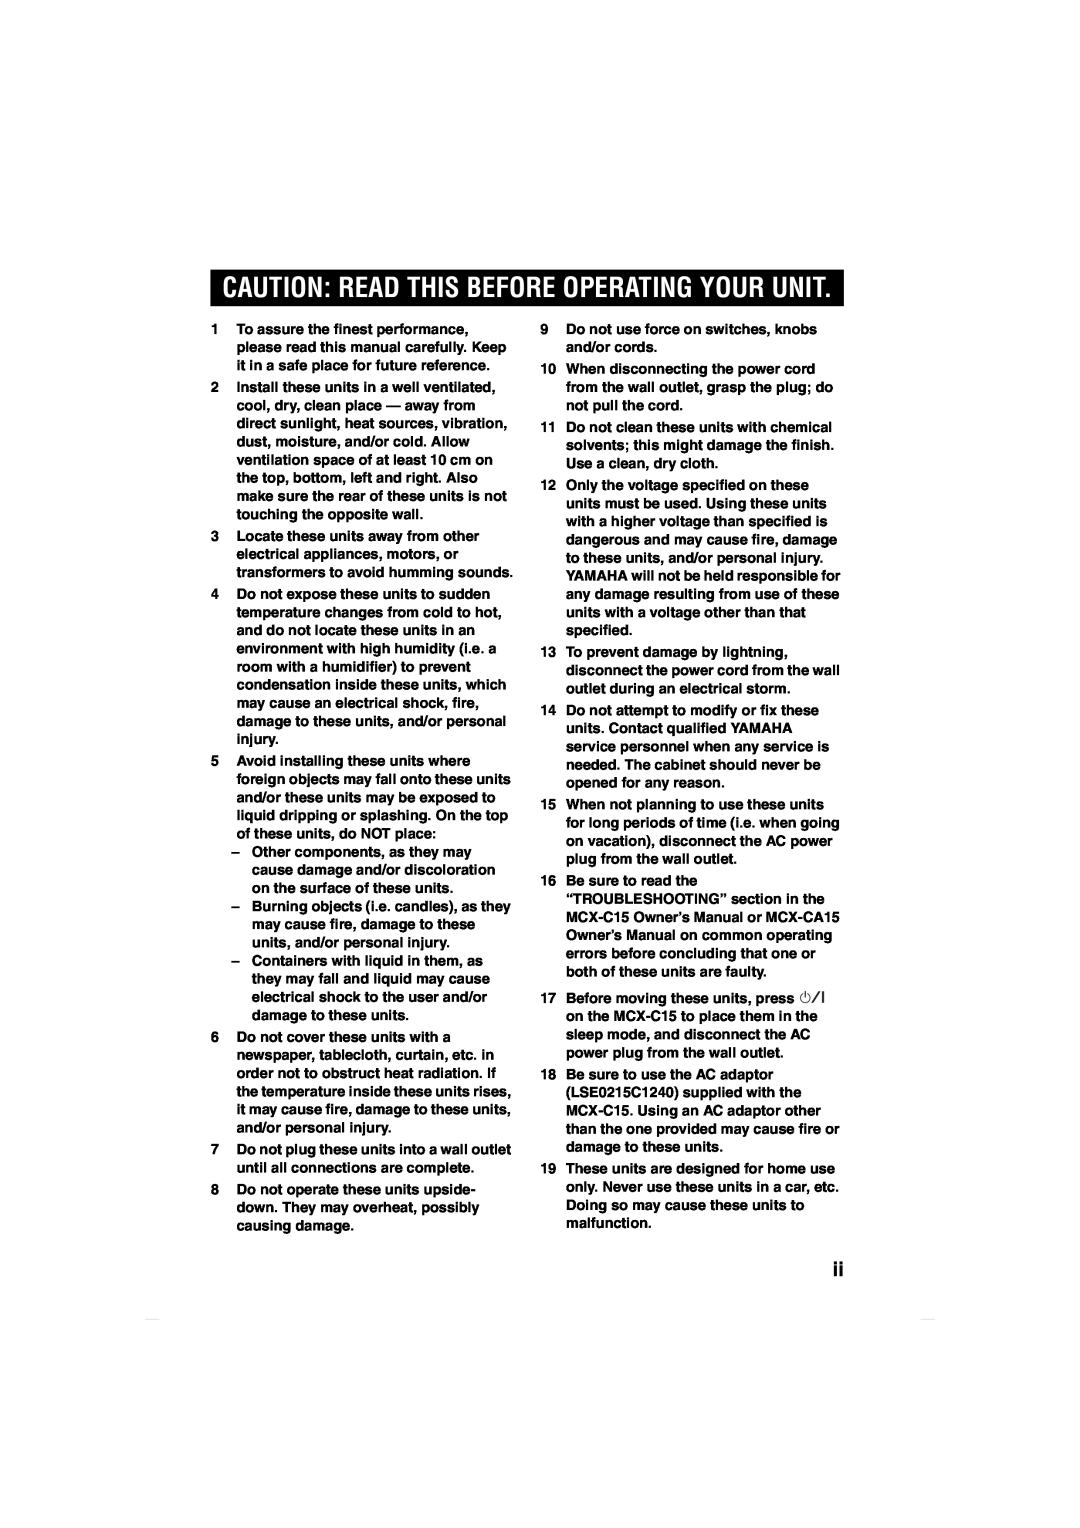 Yamaha MCX-CA15 owner manual Caution Read This Before Operating Your Unit 